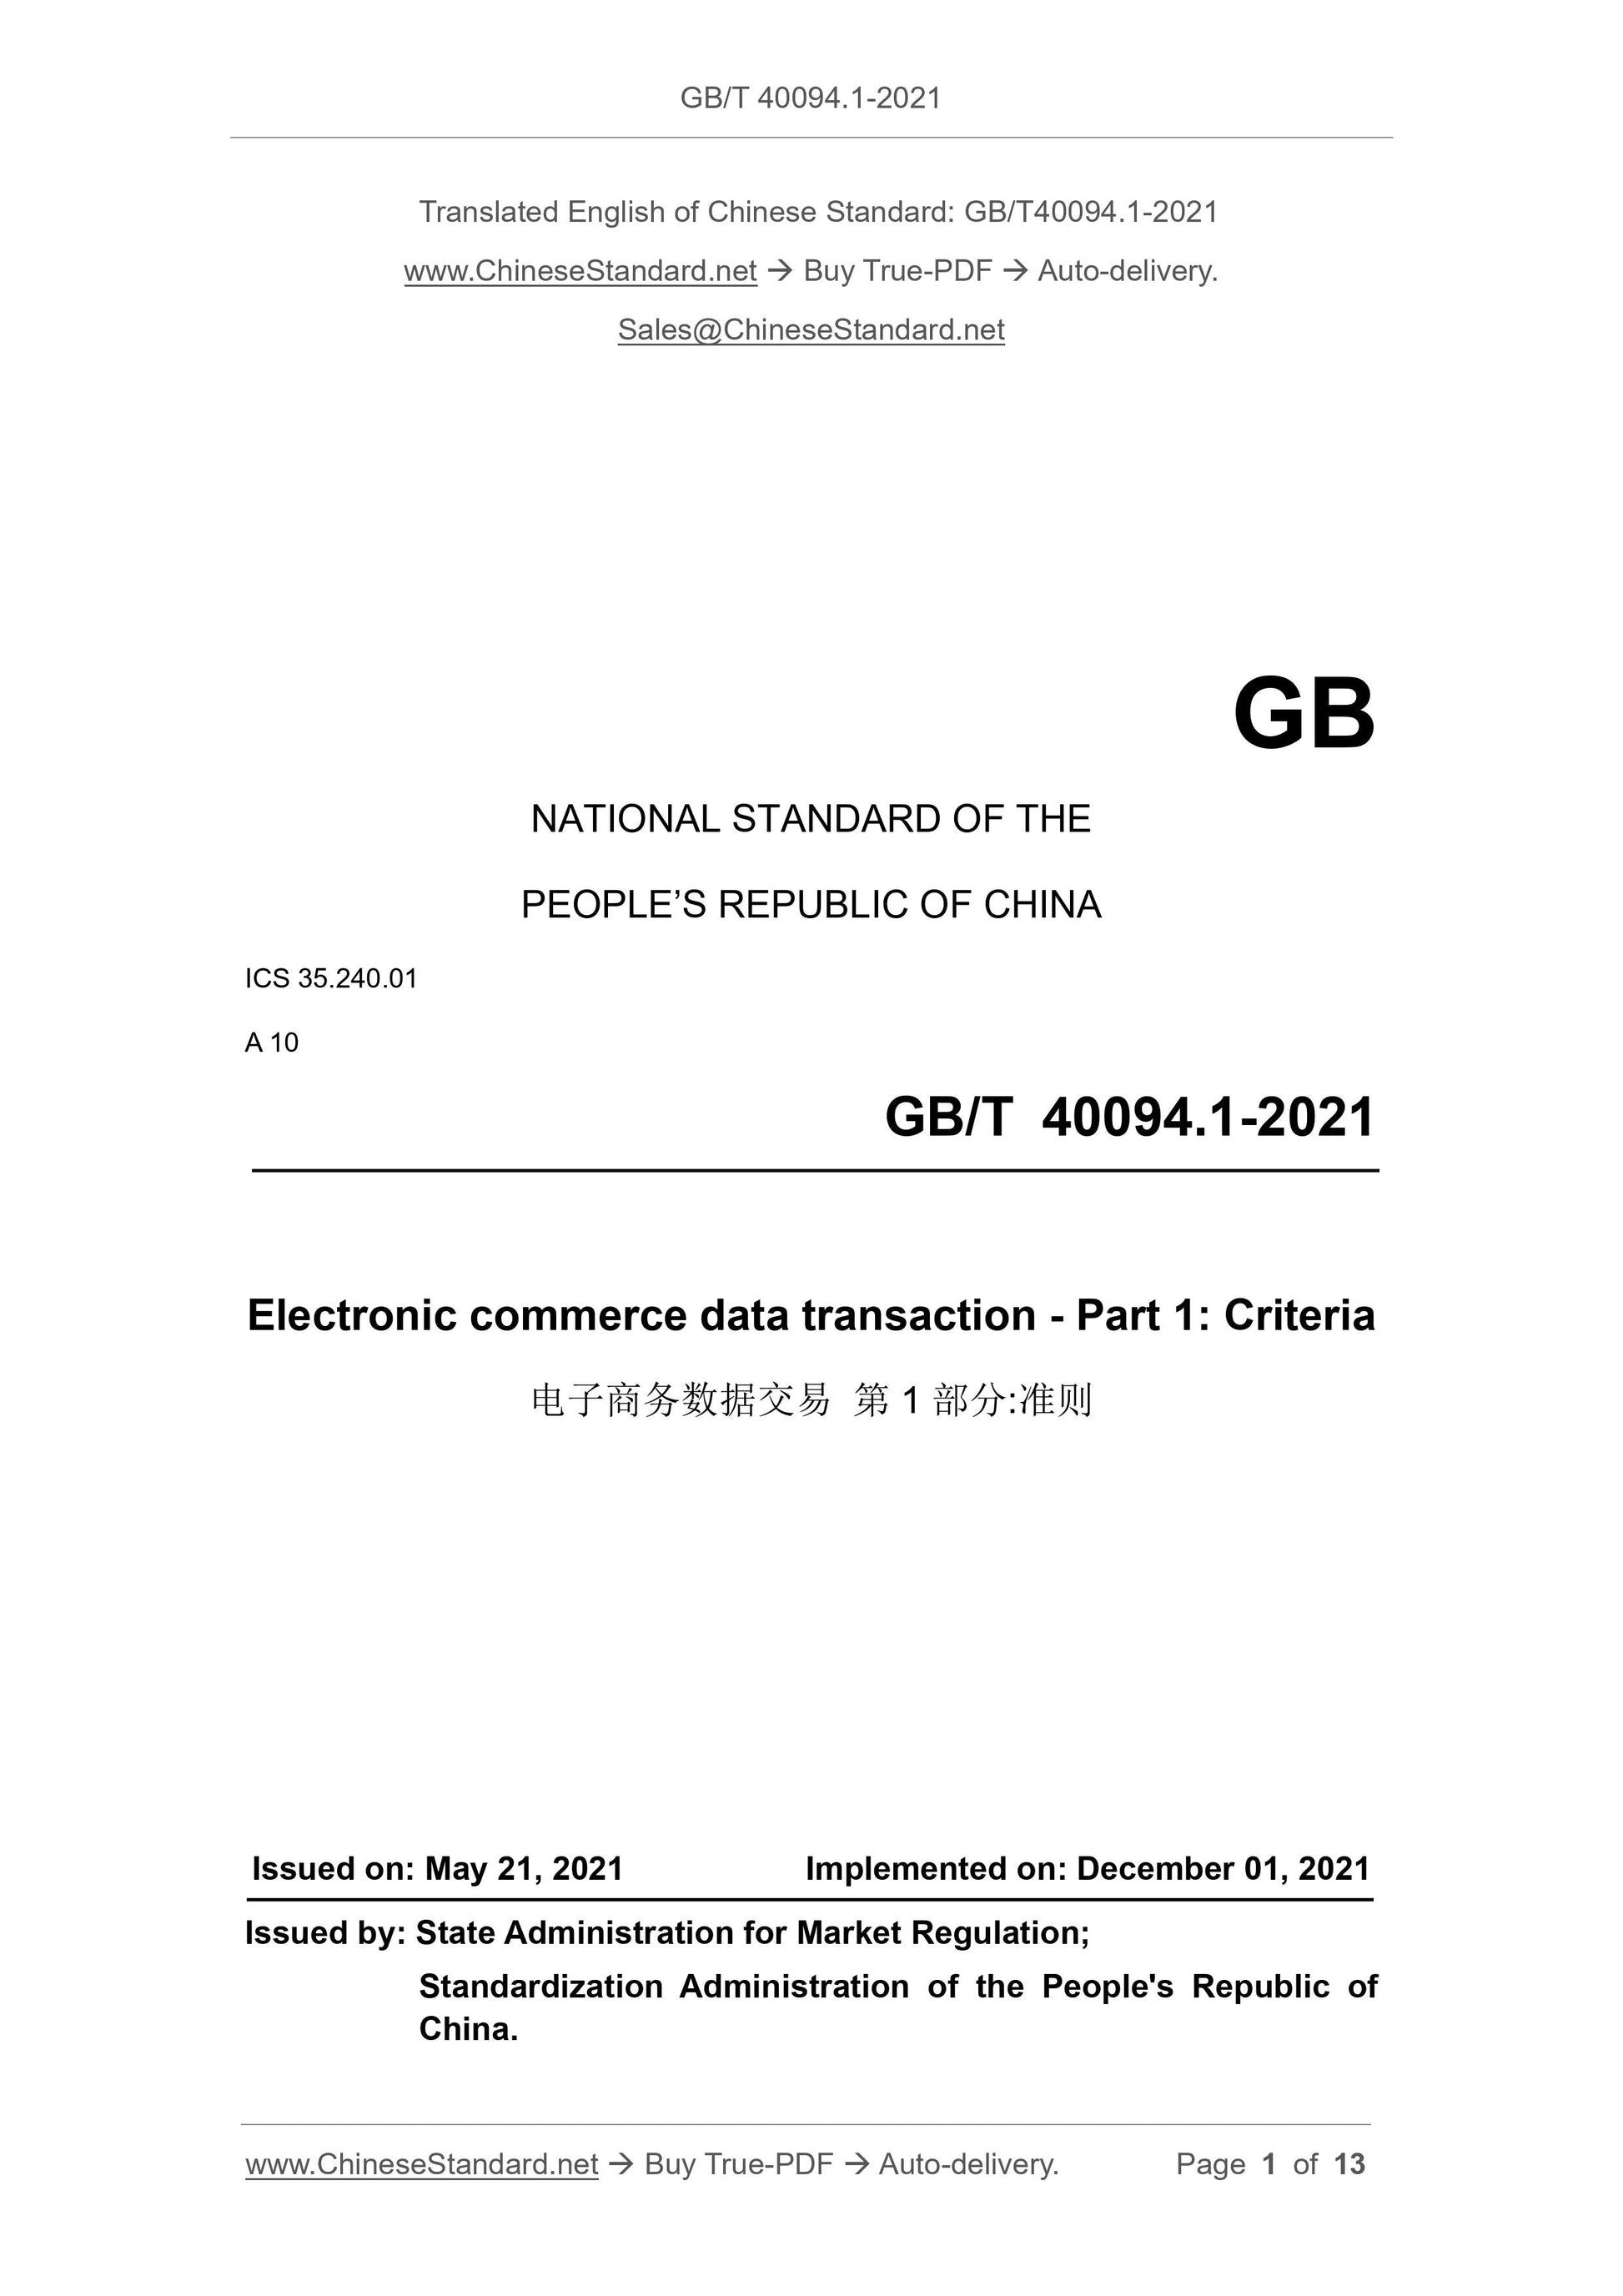 GB/T 40094.1-2021 Page 1